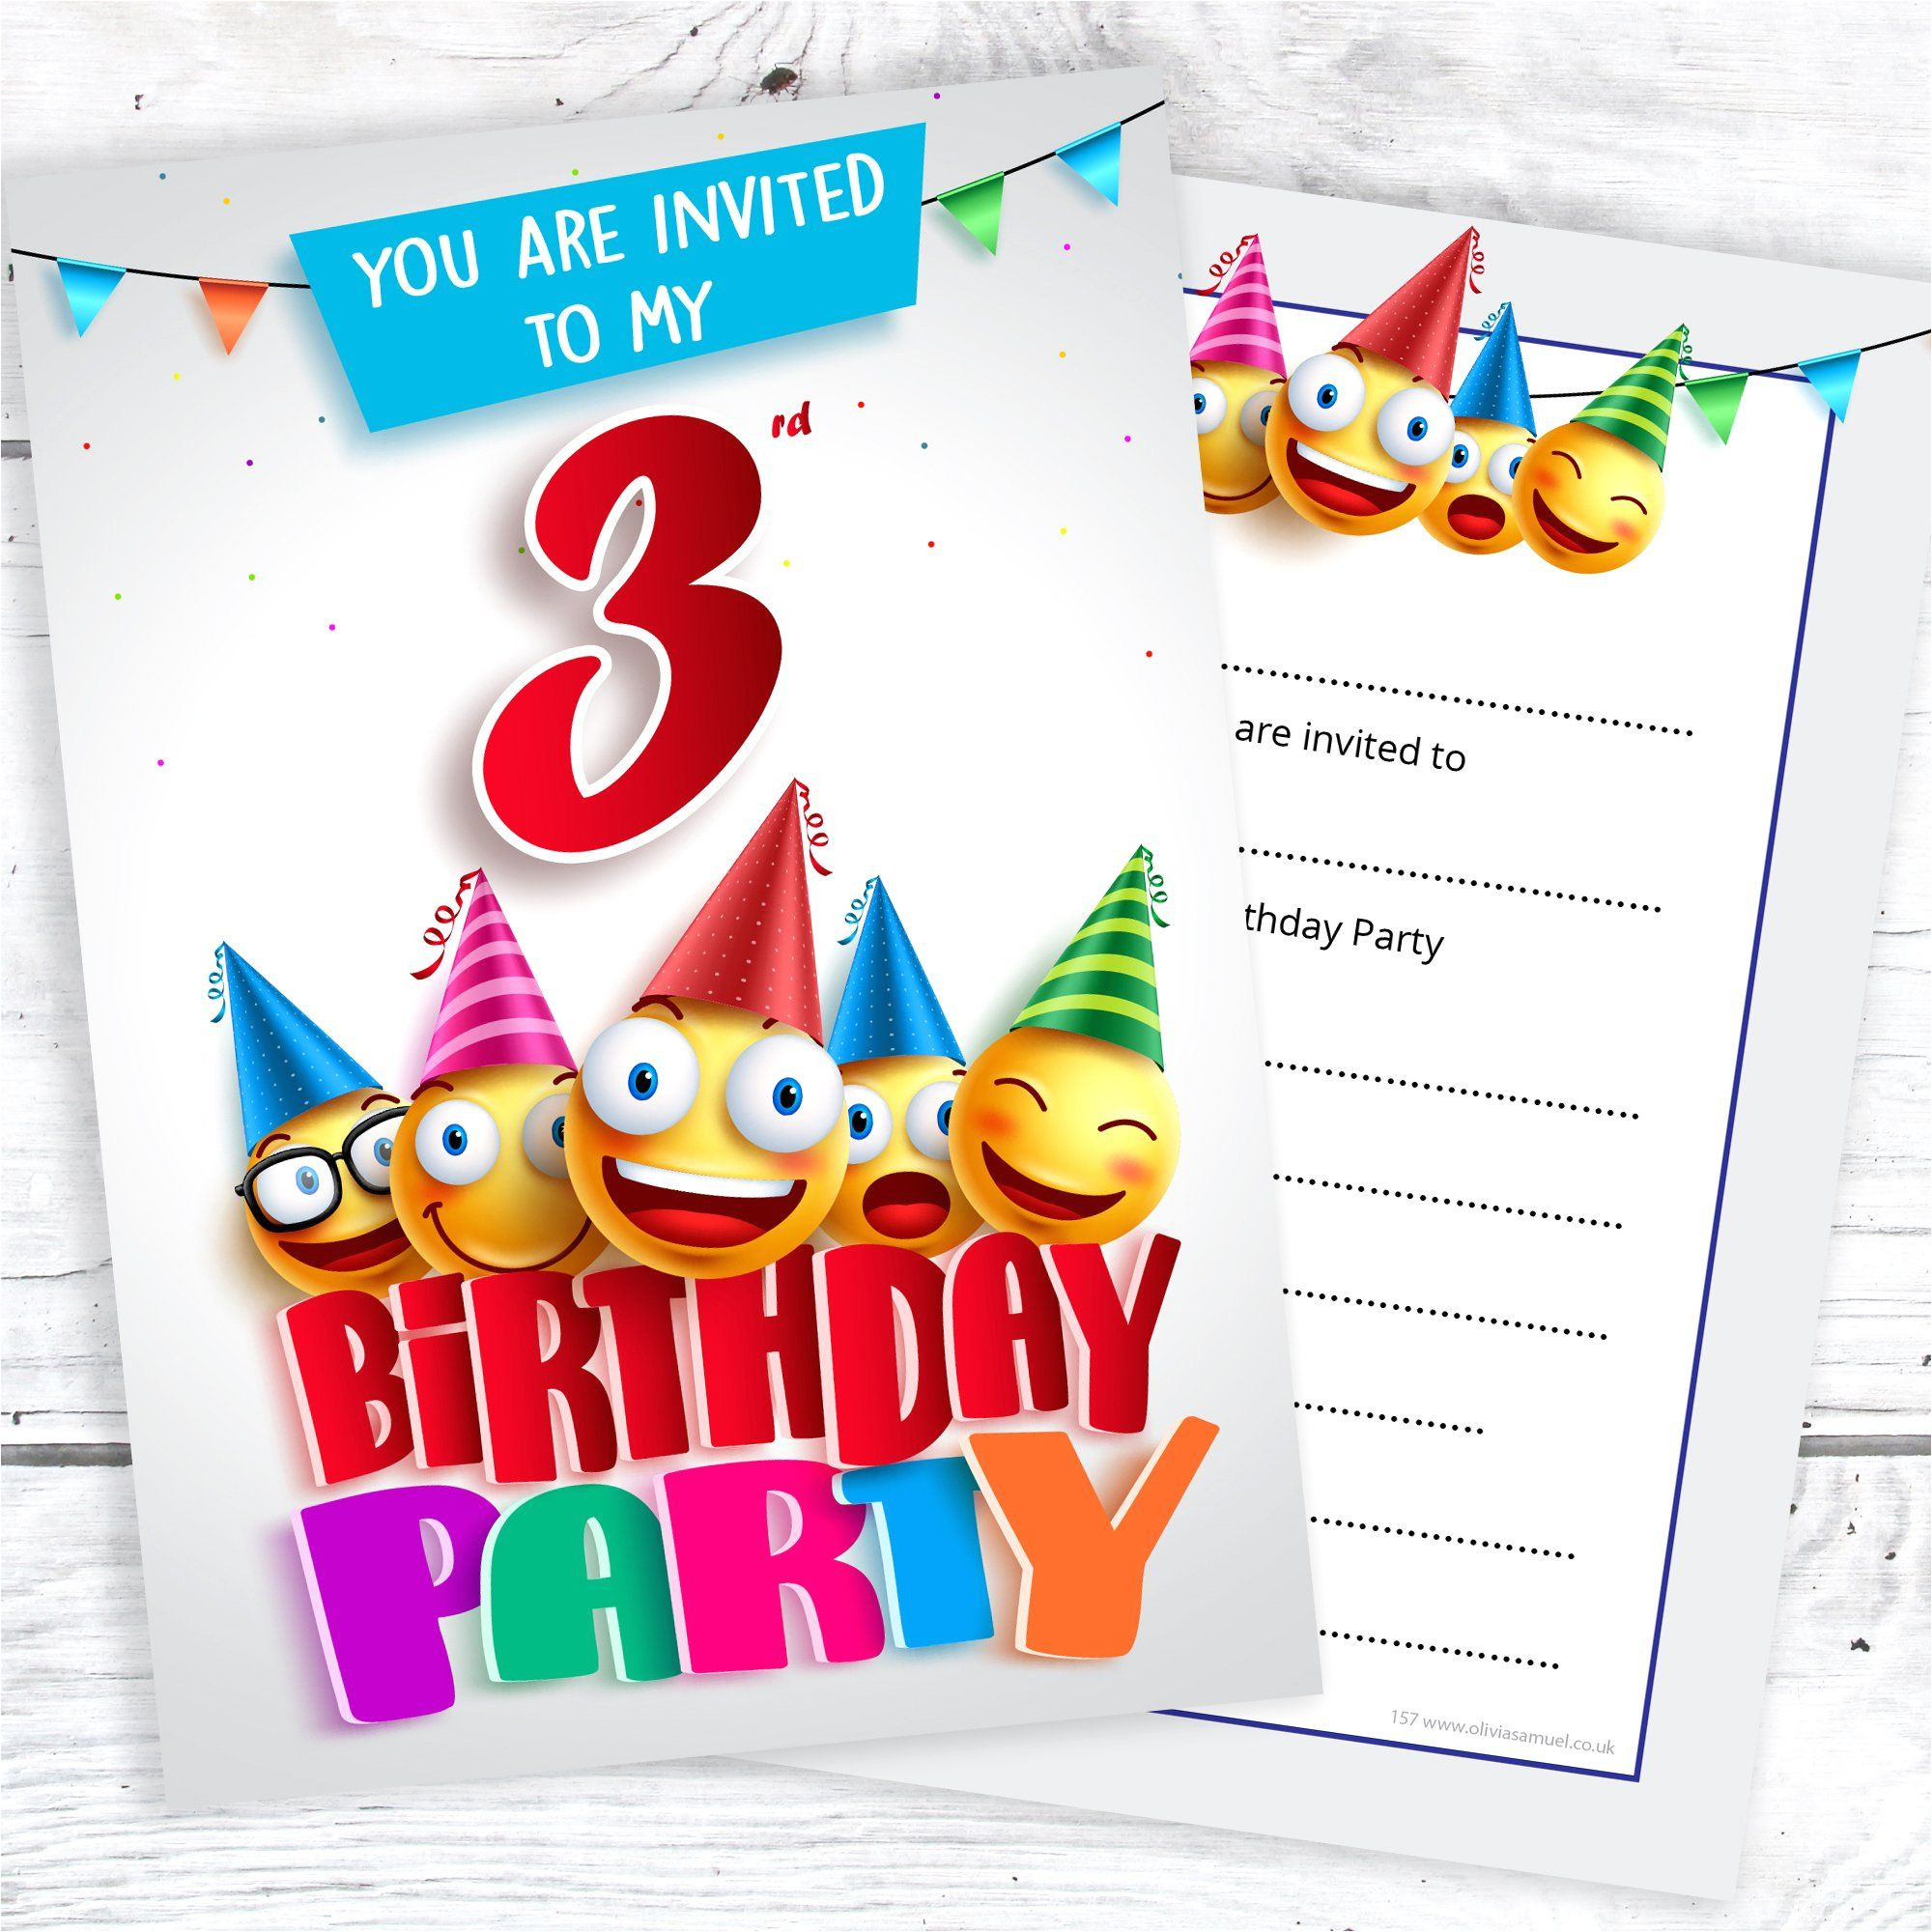 Invitation Card for Your Birthday Party Boys Birthday Party Invitation Template In 2020 2nd